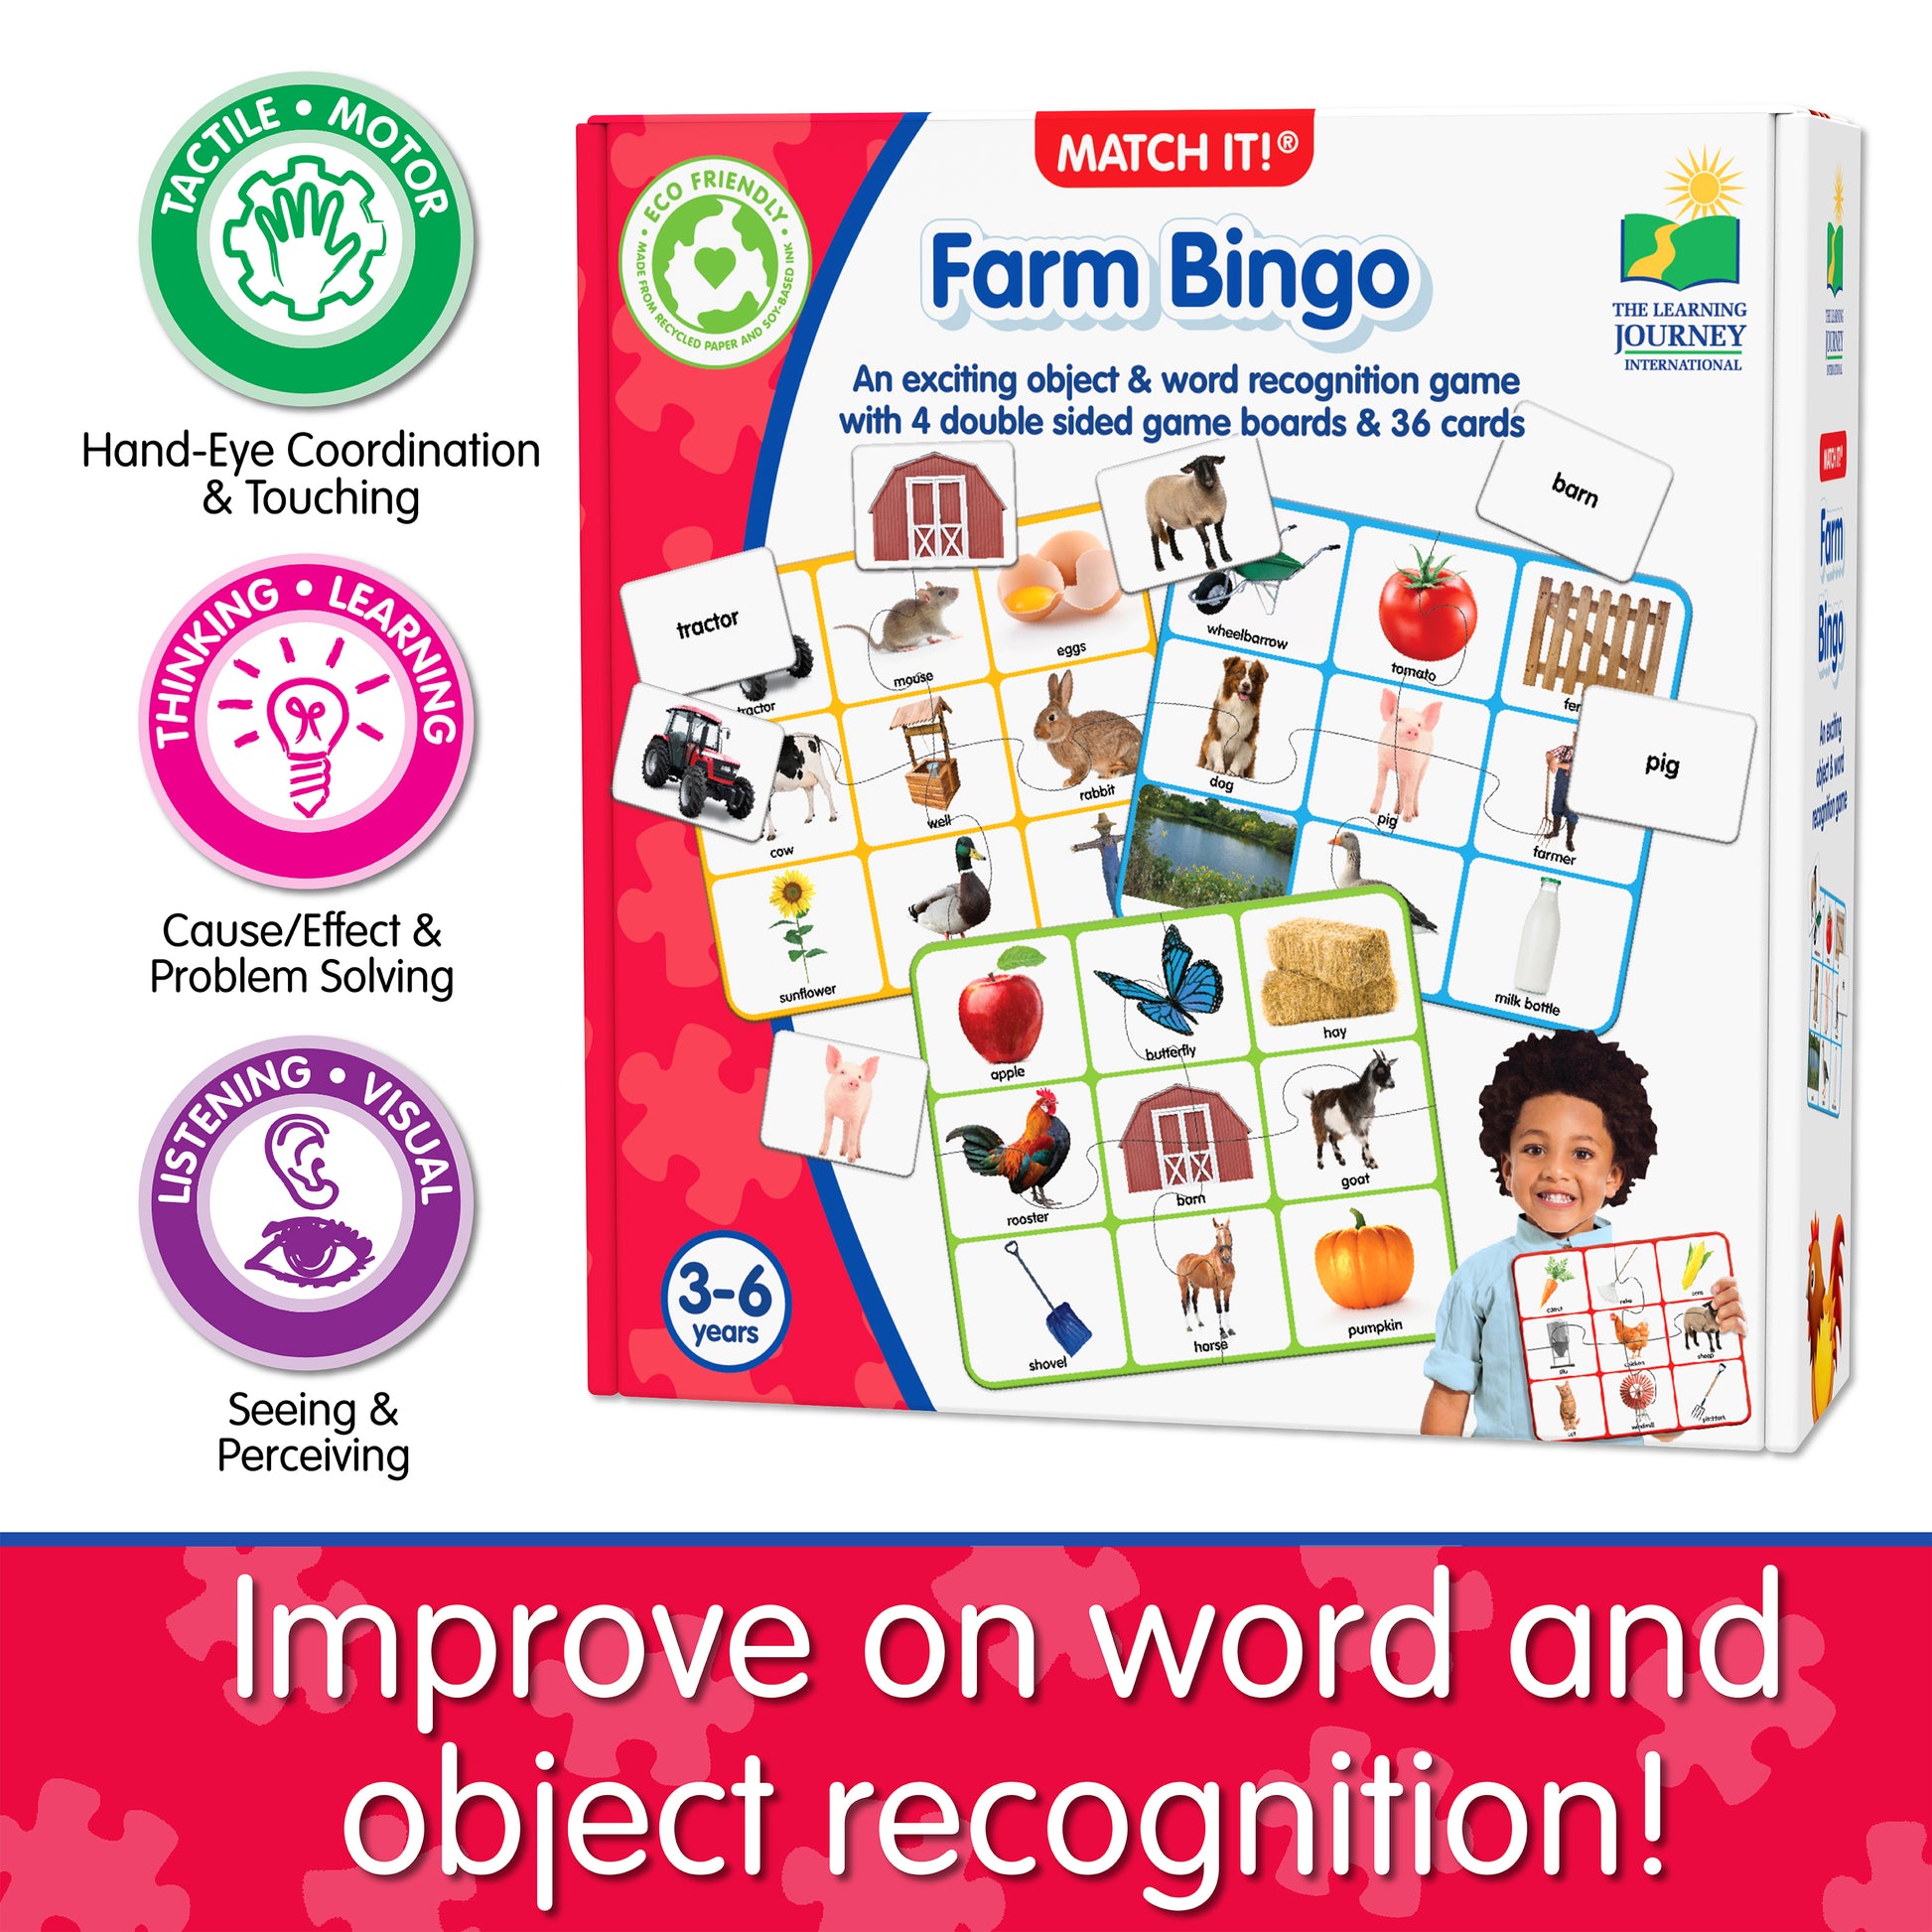 Infographic about Match It - Farm Bingo's educational benefits that says, "Improve on word and object recognition!"